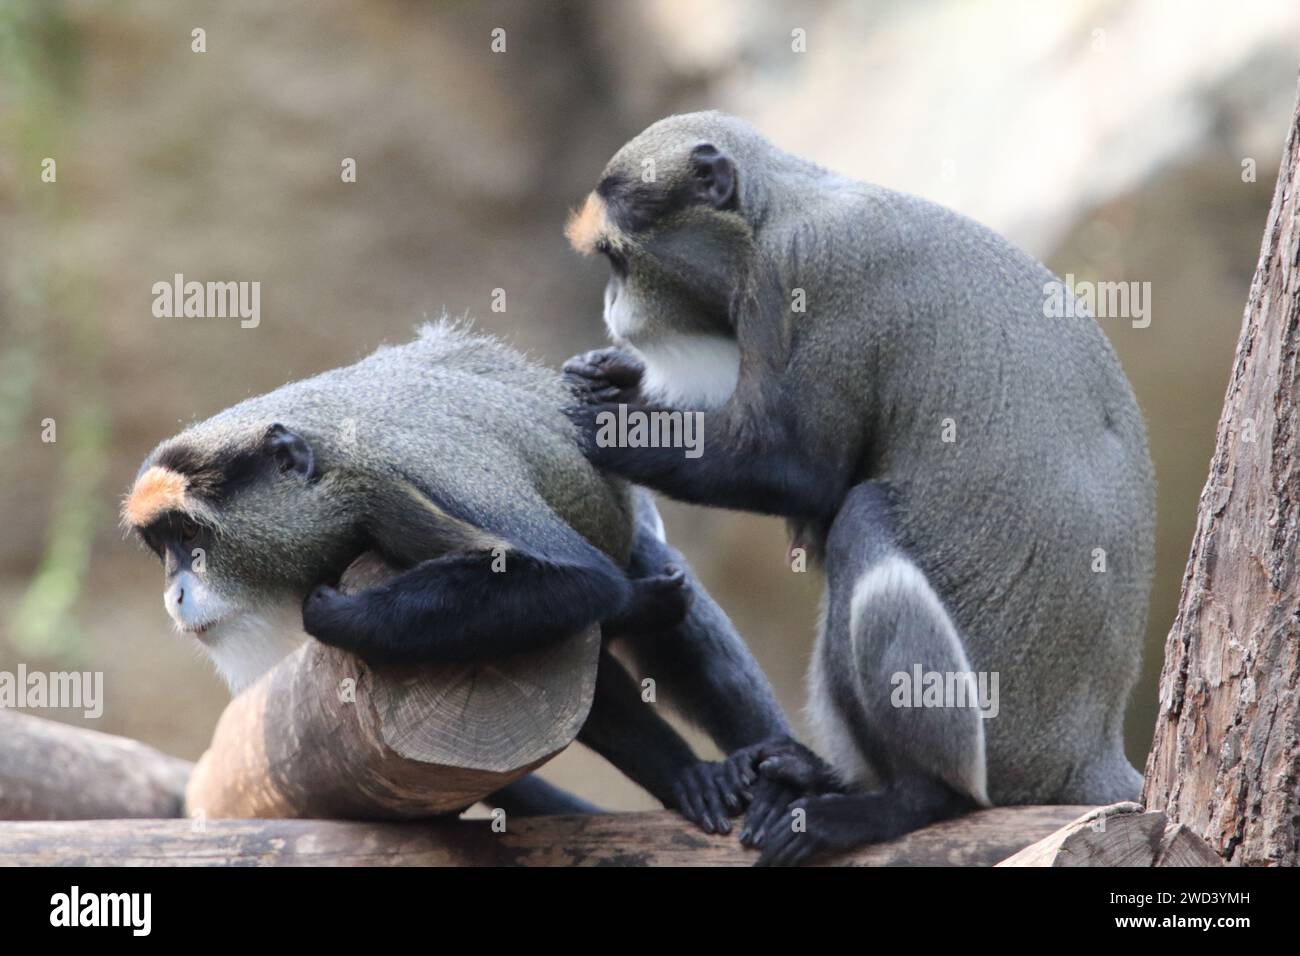 The De Brazza's monkey (Cercopithecus neglectus) is an Old World monkey endemic to the wetlands of central Africa. It is one of the most widespread Af Stock Photo